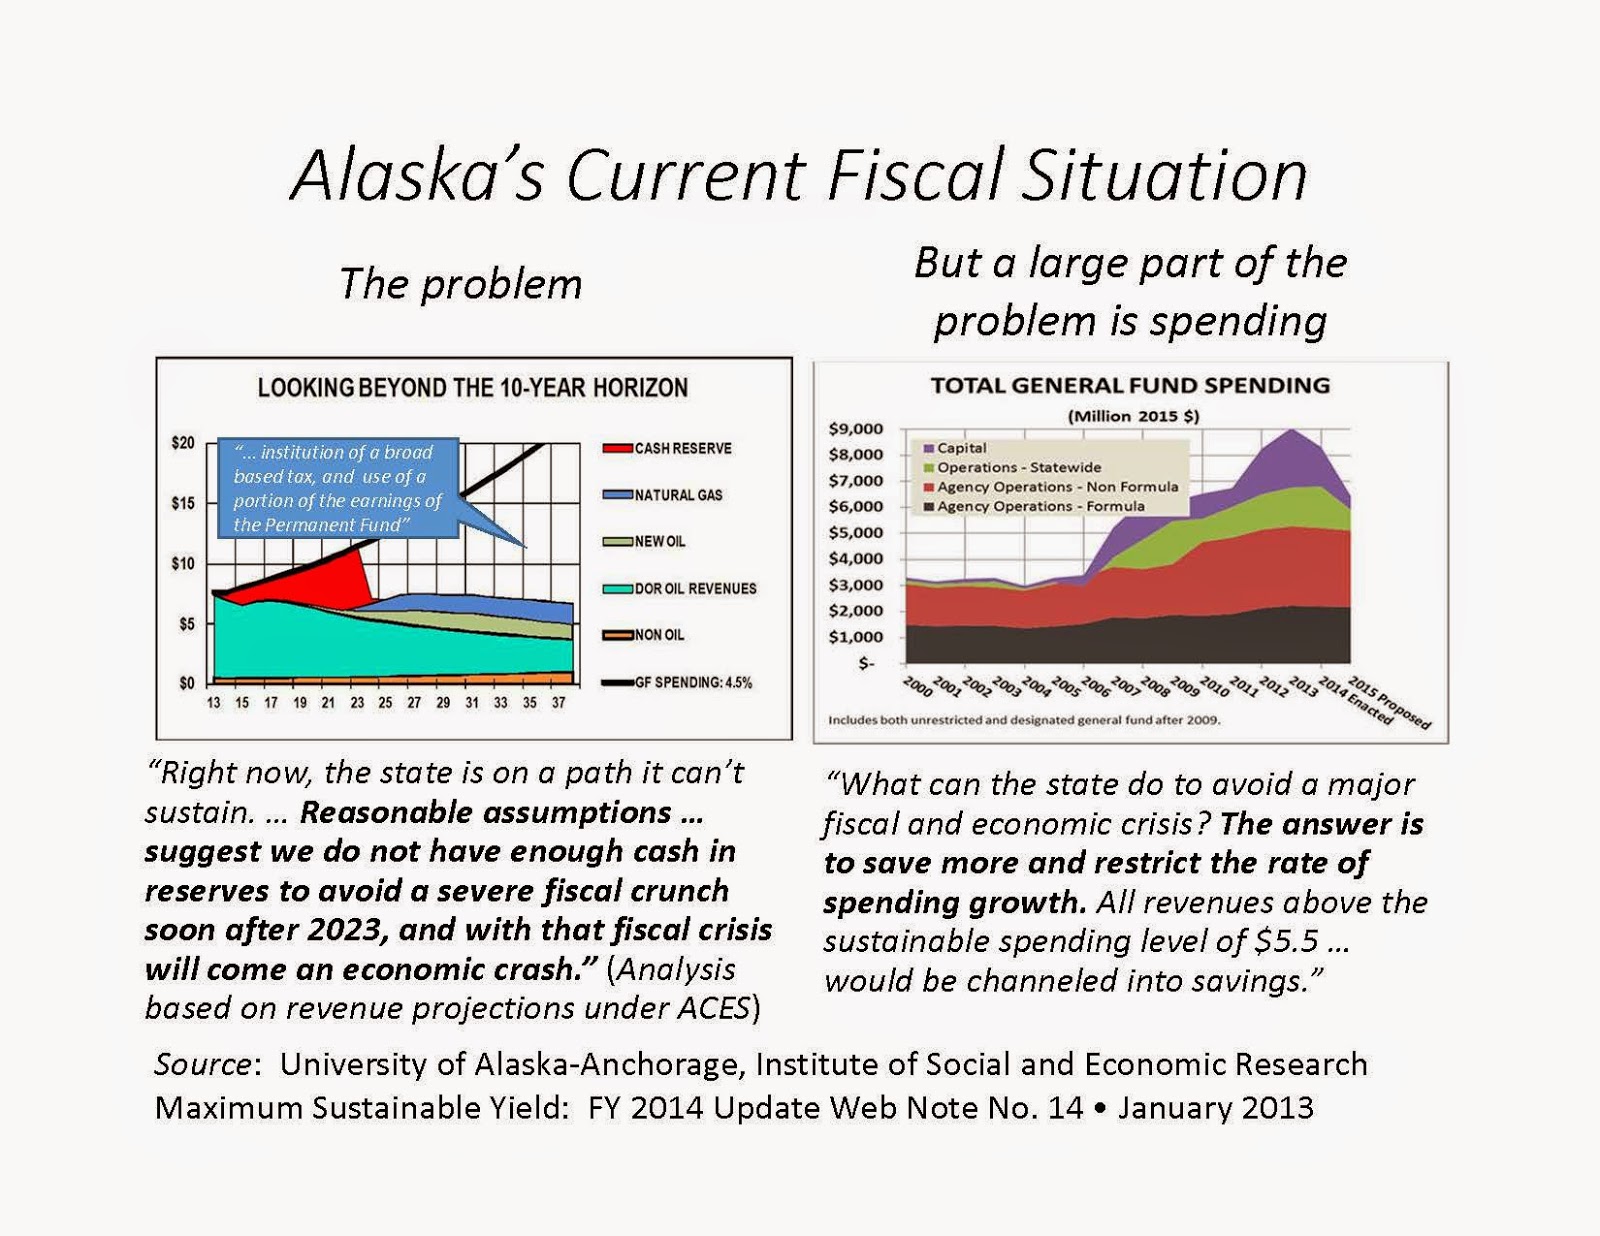 notes-from-the-alaska-fiscal-cliff-brad-keithley-s-commentary-on-oil